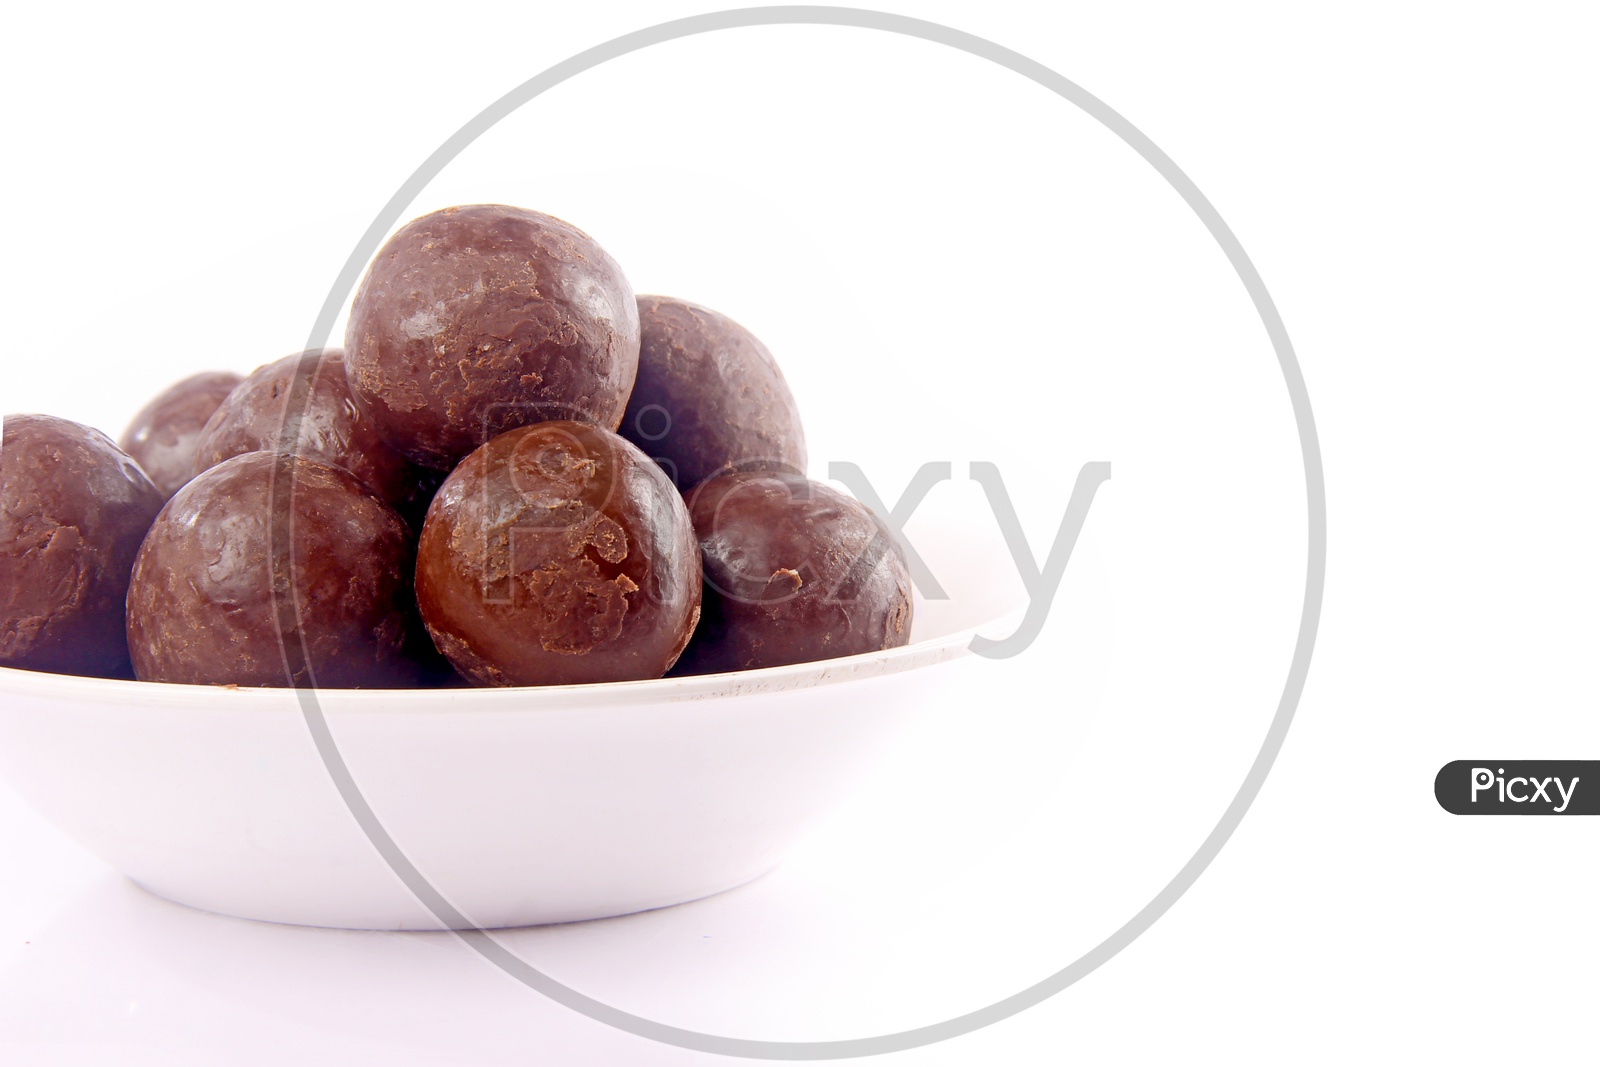 Chocolate Coated Hazel Nuts in a Bowl On an Isolated White Background